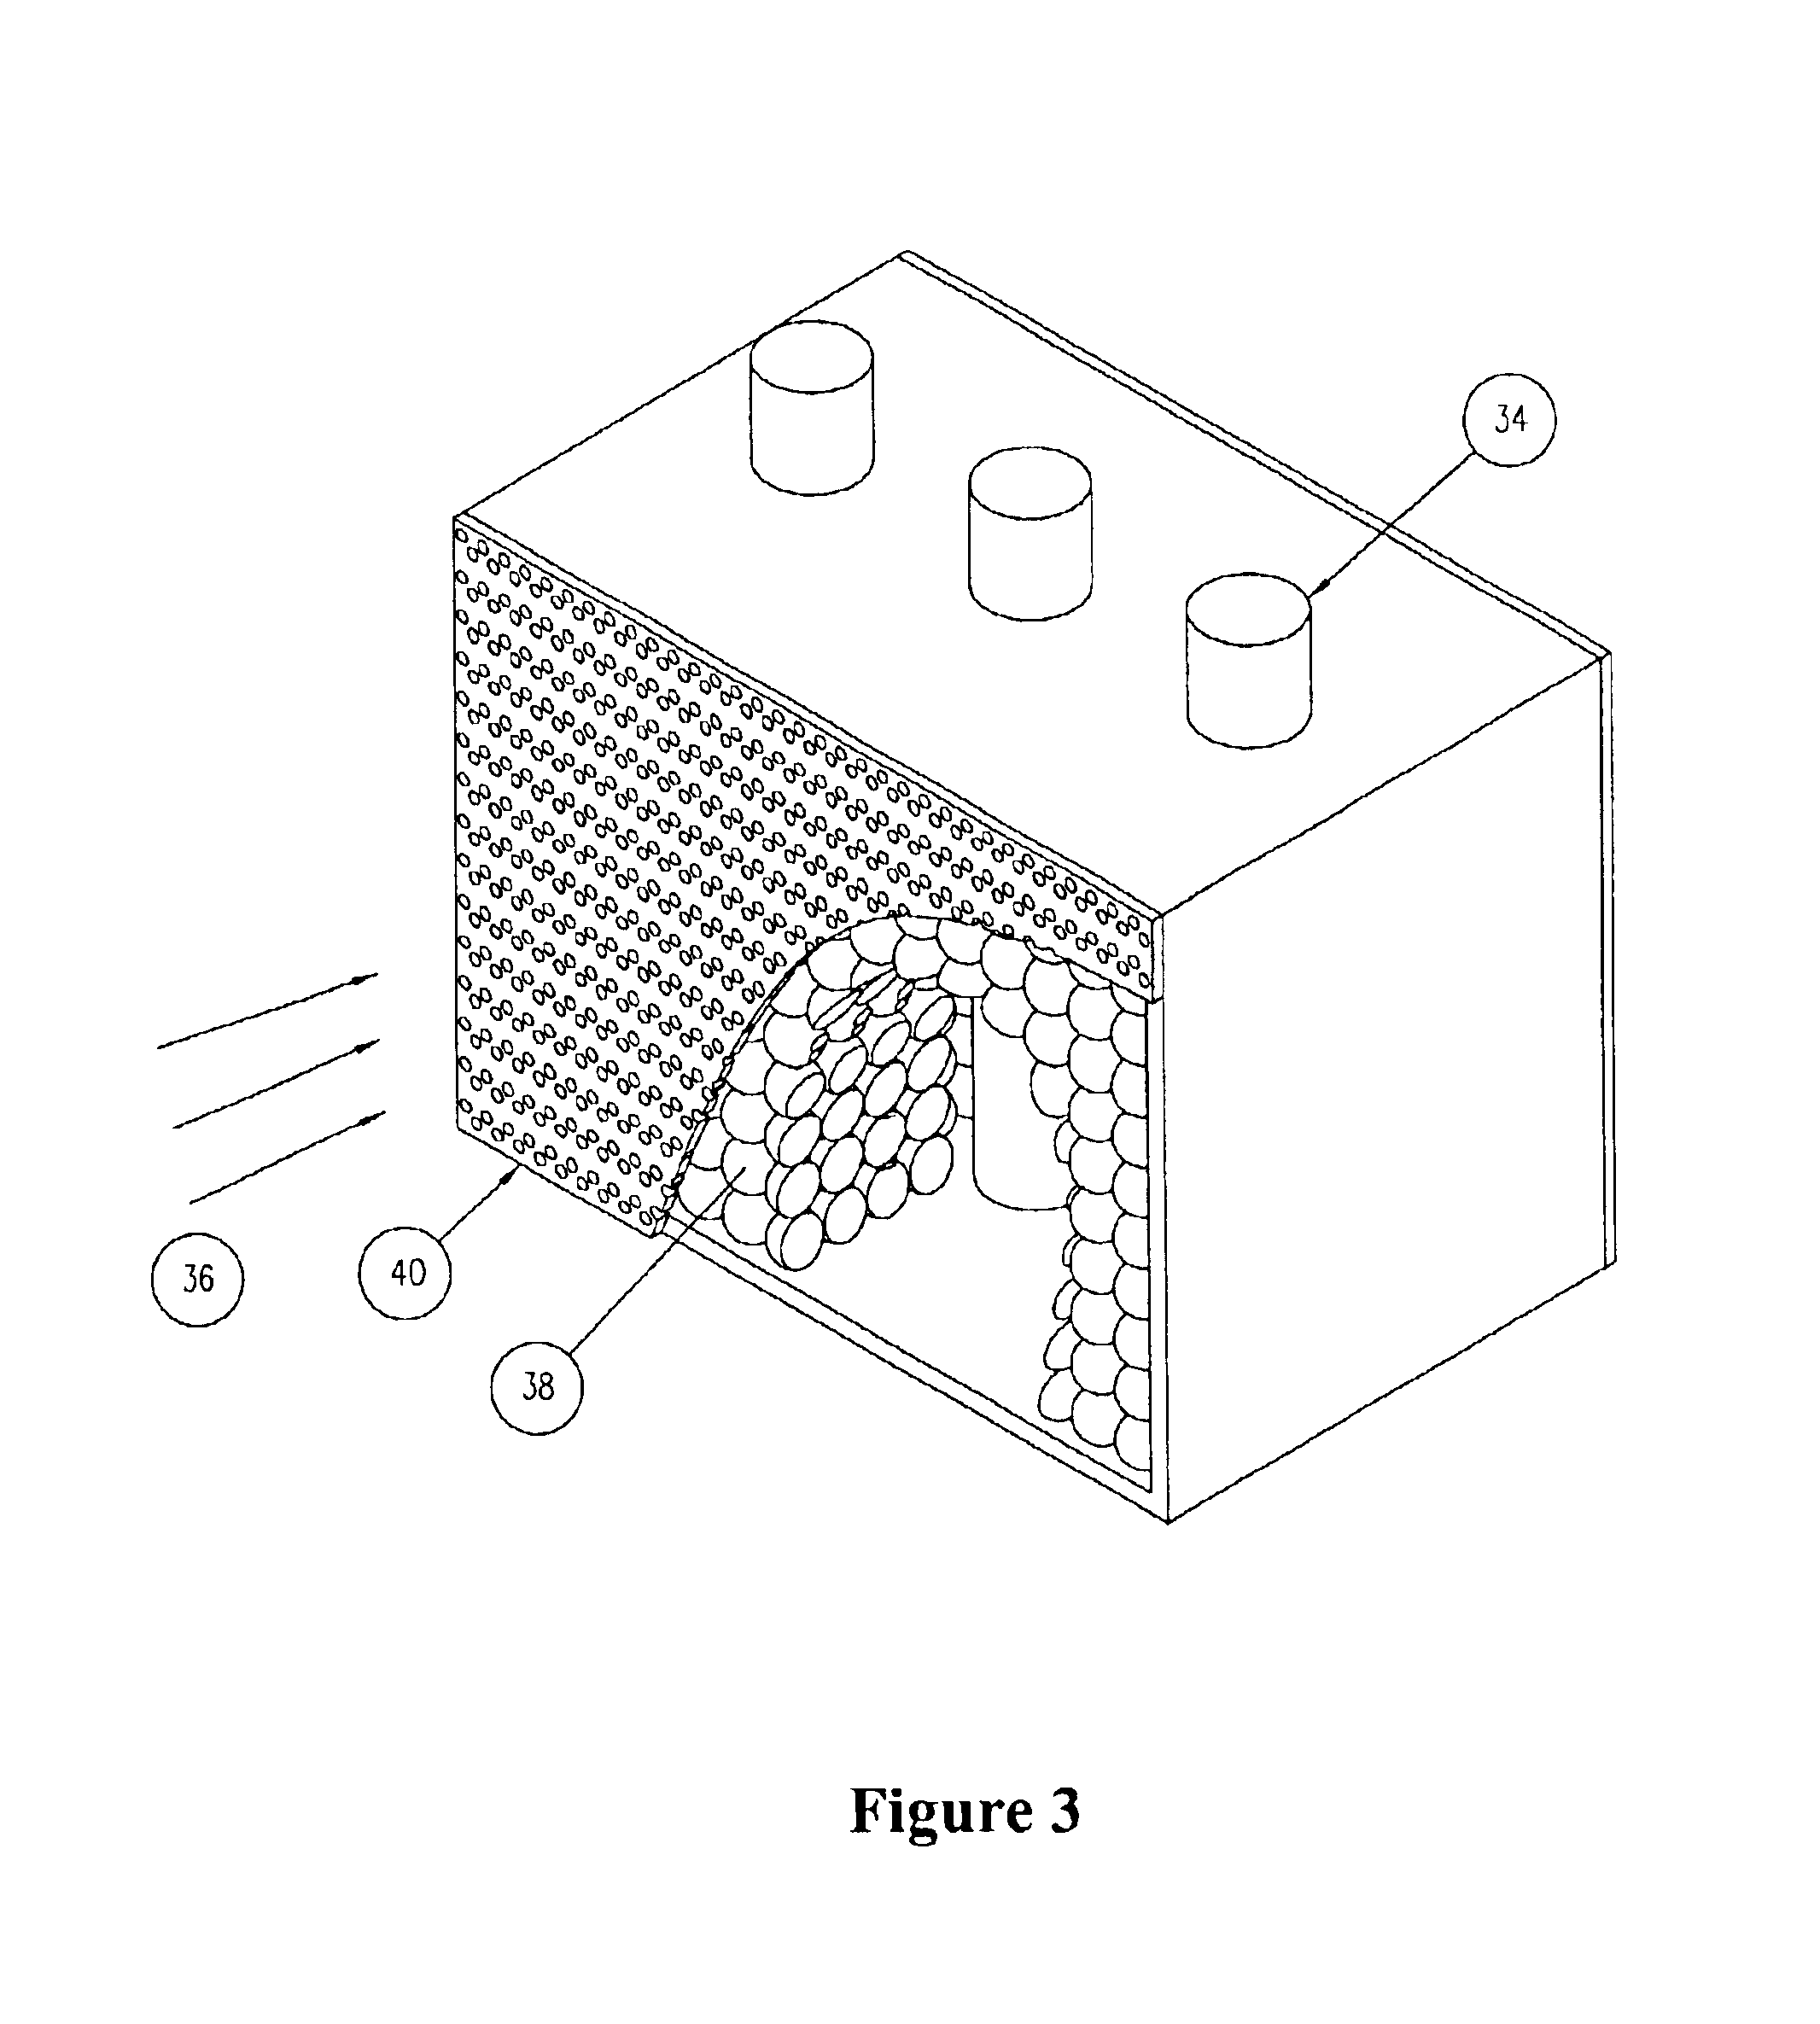 Apparatus and method for photocatalytic purification and disinfection of fluids